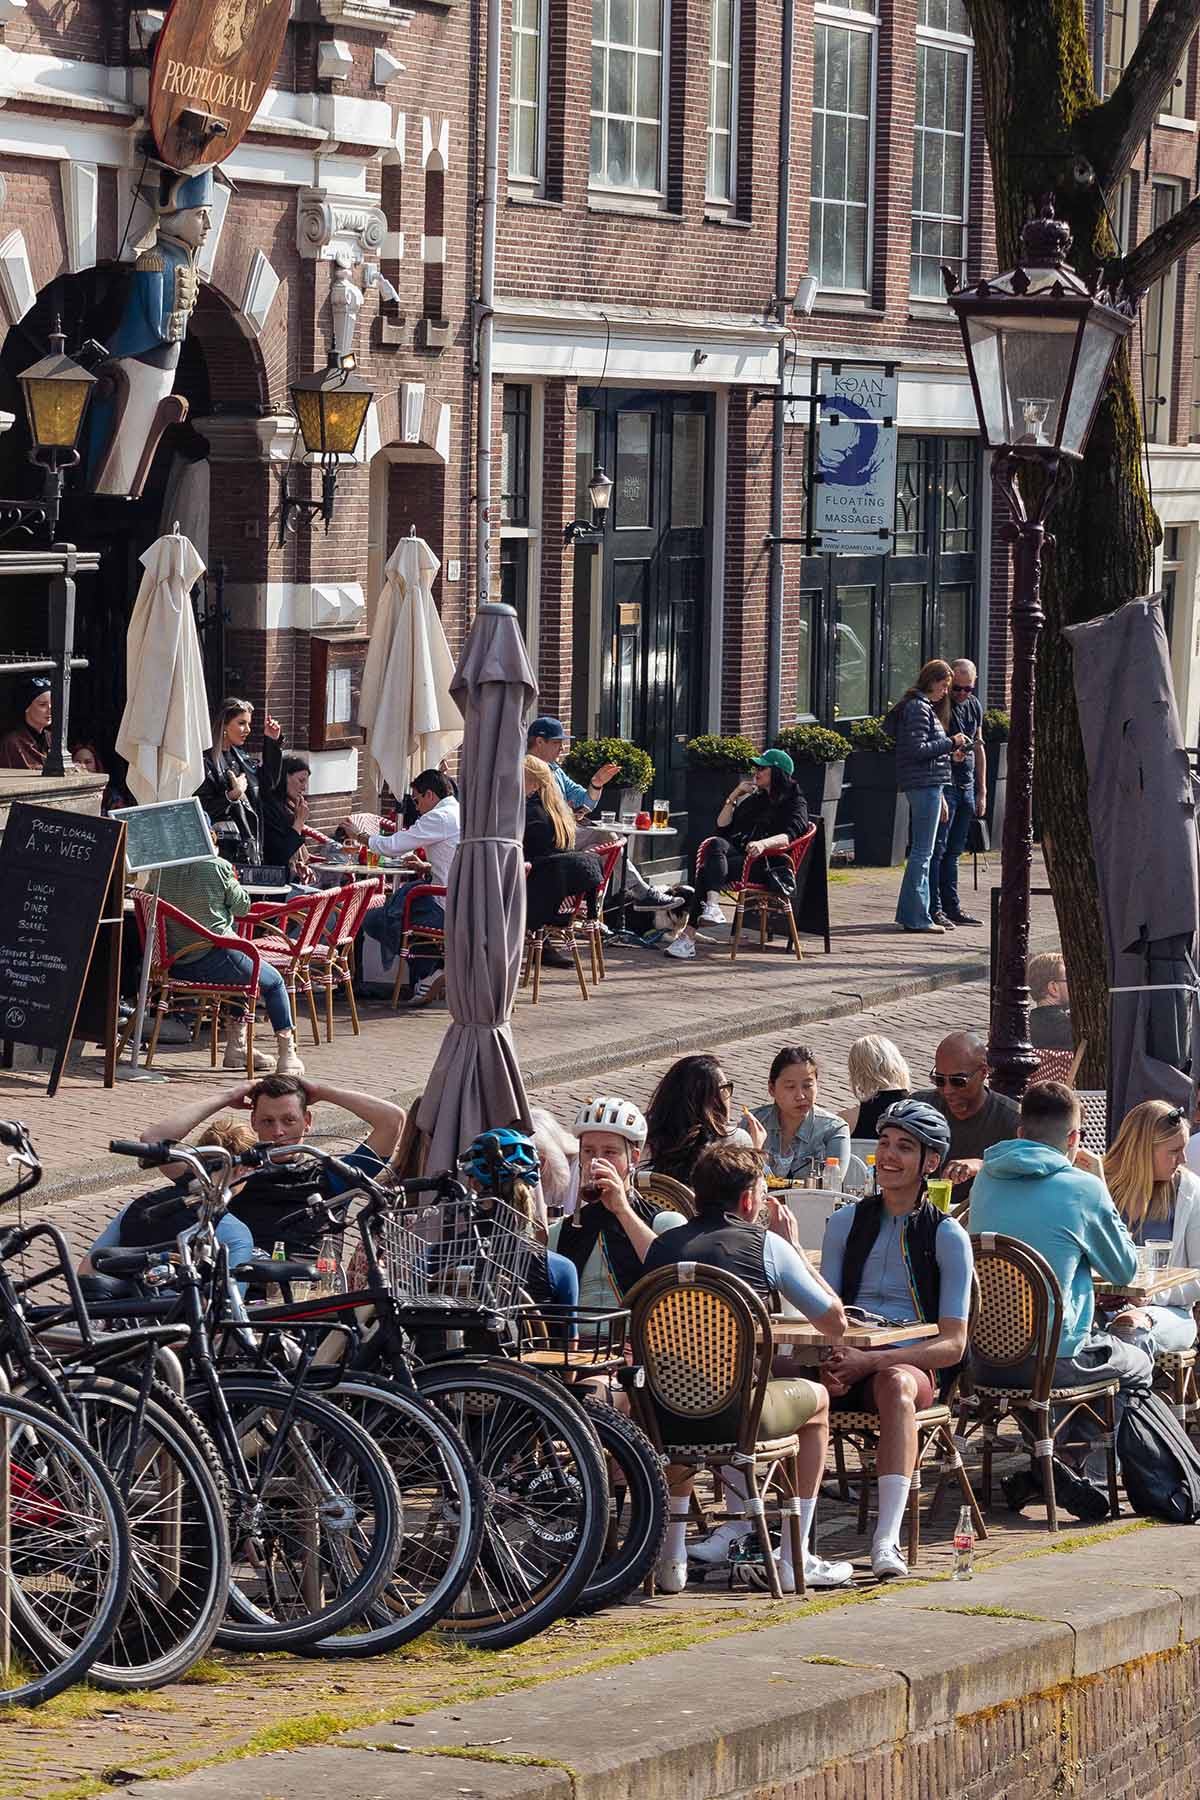 Your guide to riding your bike in The Netherlands